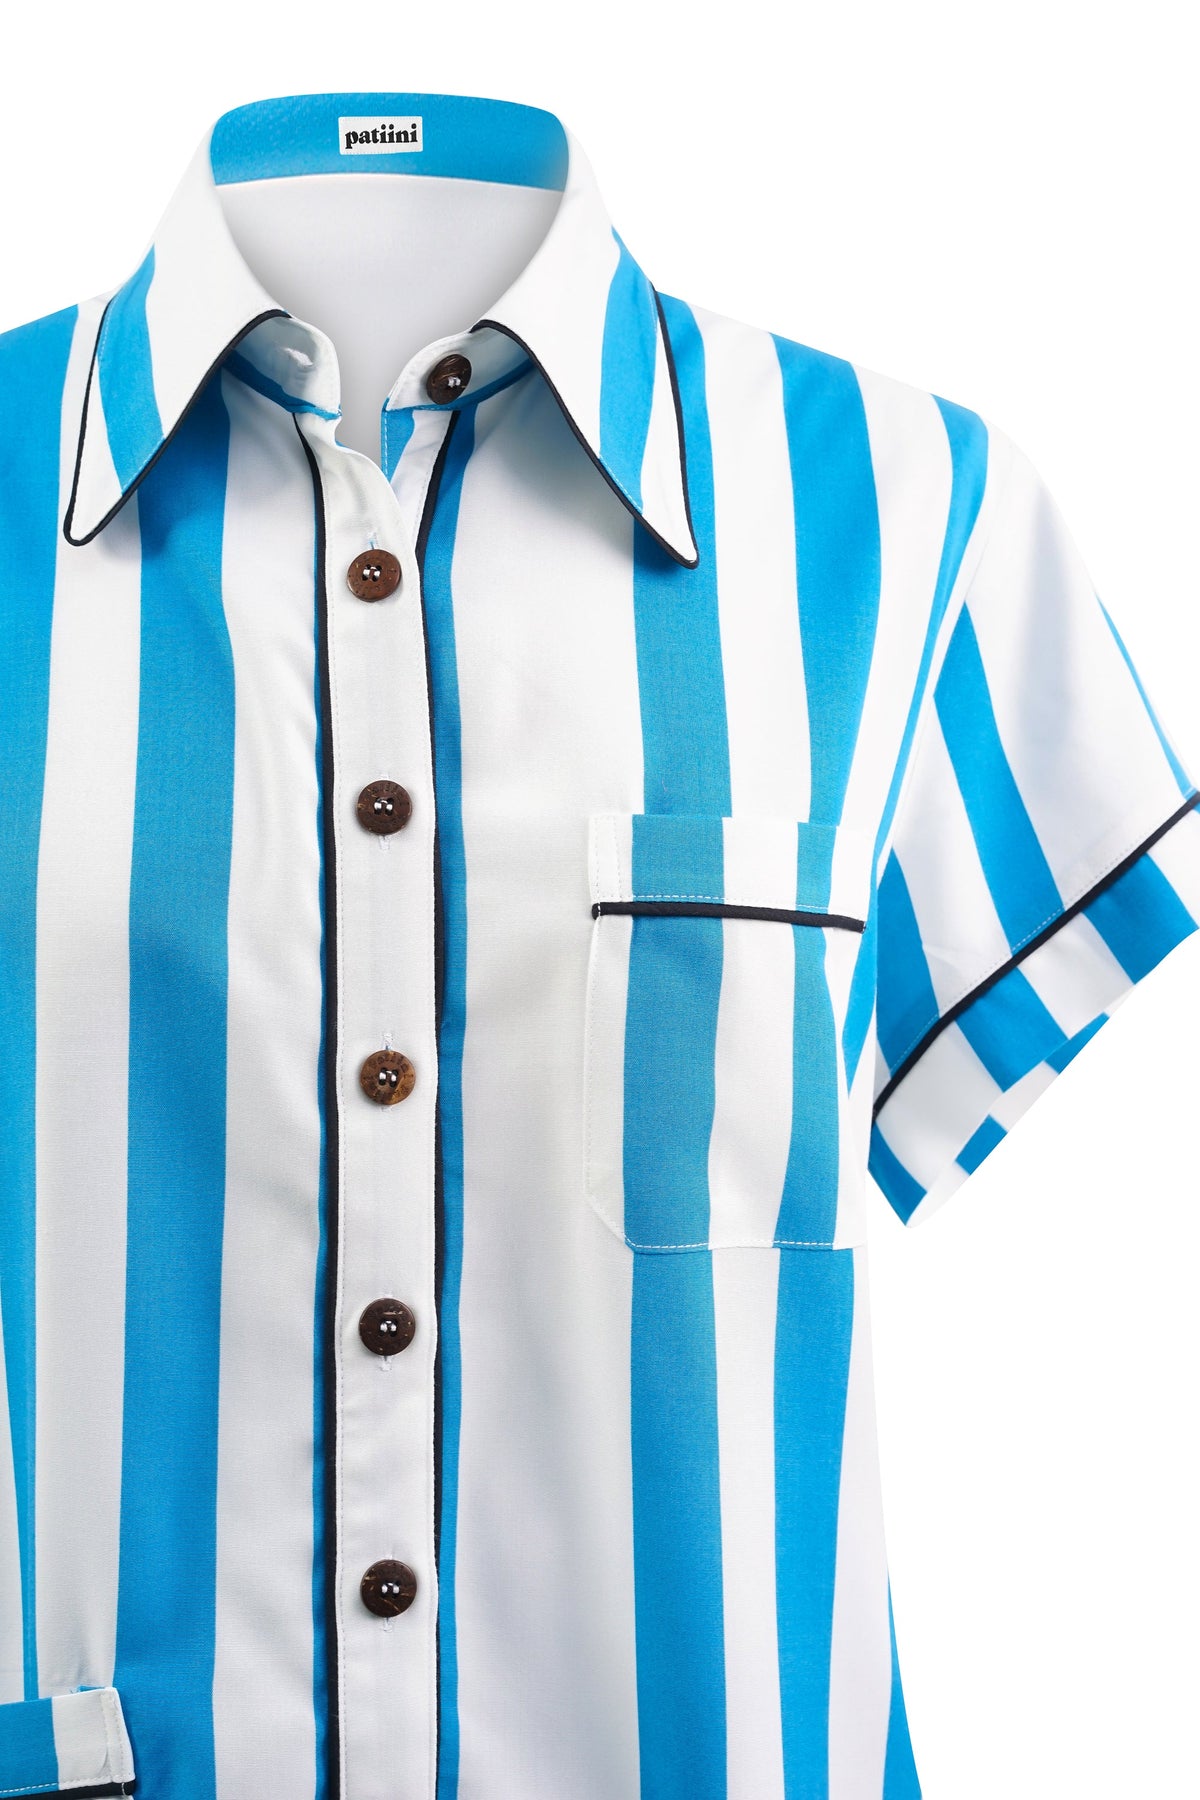 Close-up of a blue and white striped button-down shirt.